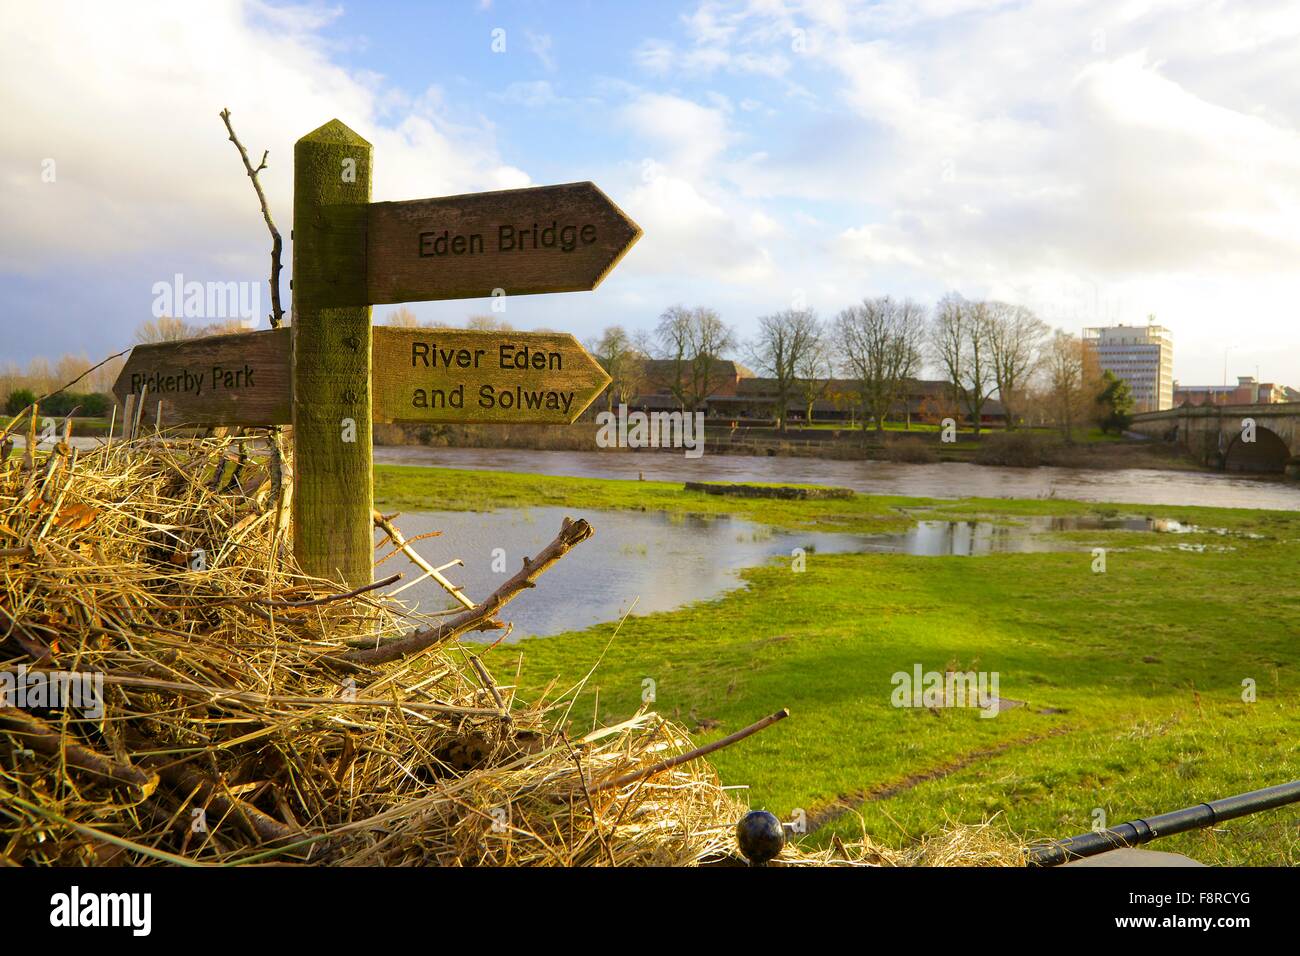 Aftermath of Carlisle Floods. 6th December 2015. Foot path sign showing flotsam illustrating height of flooded River Eden caused by Storm Desmond. Carlisle, Cumbria, England, UK. Stock Photo